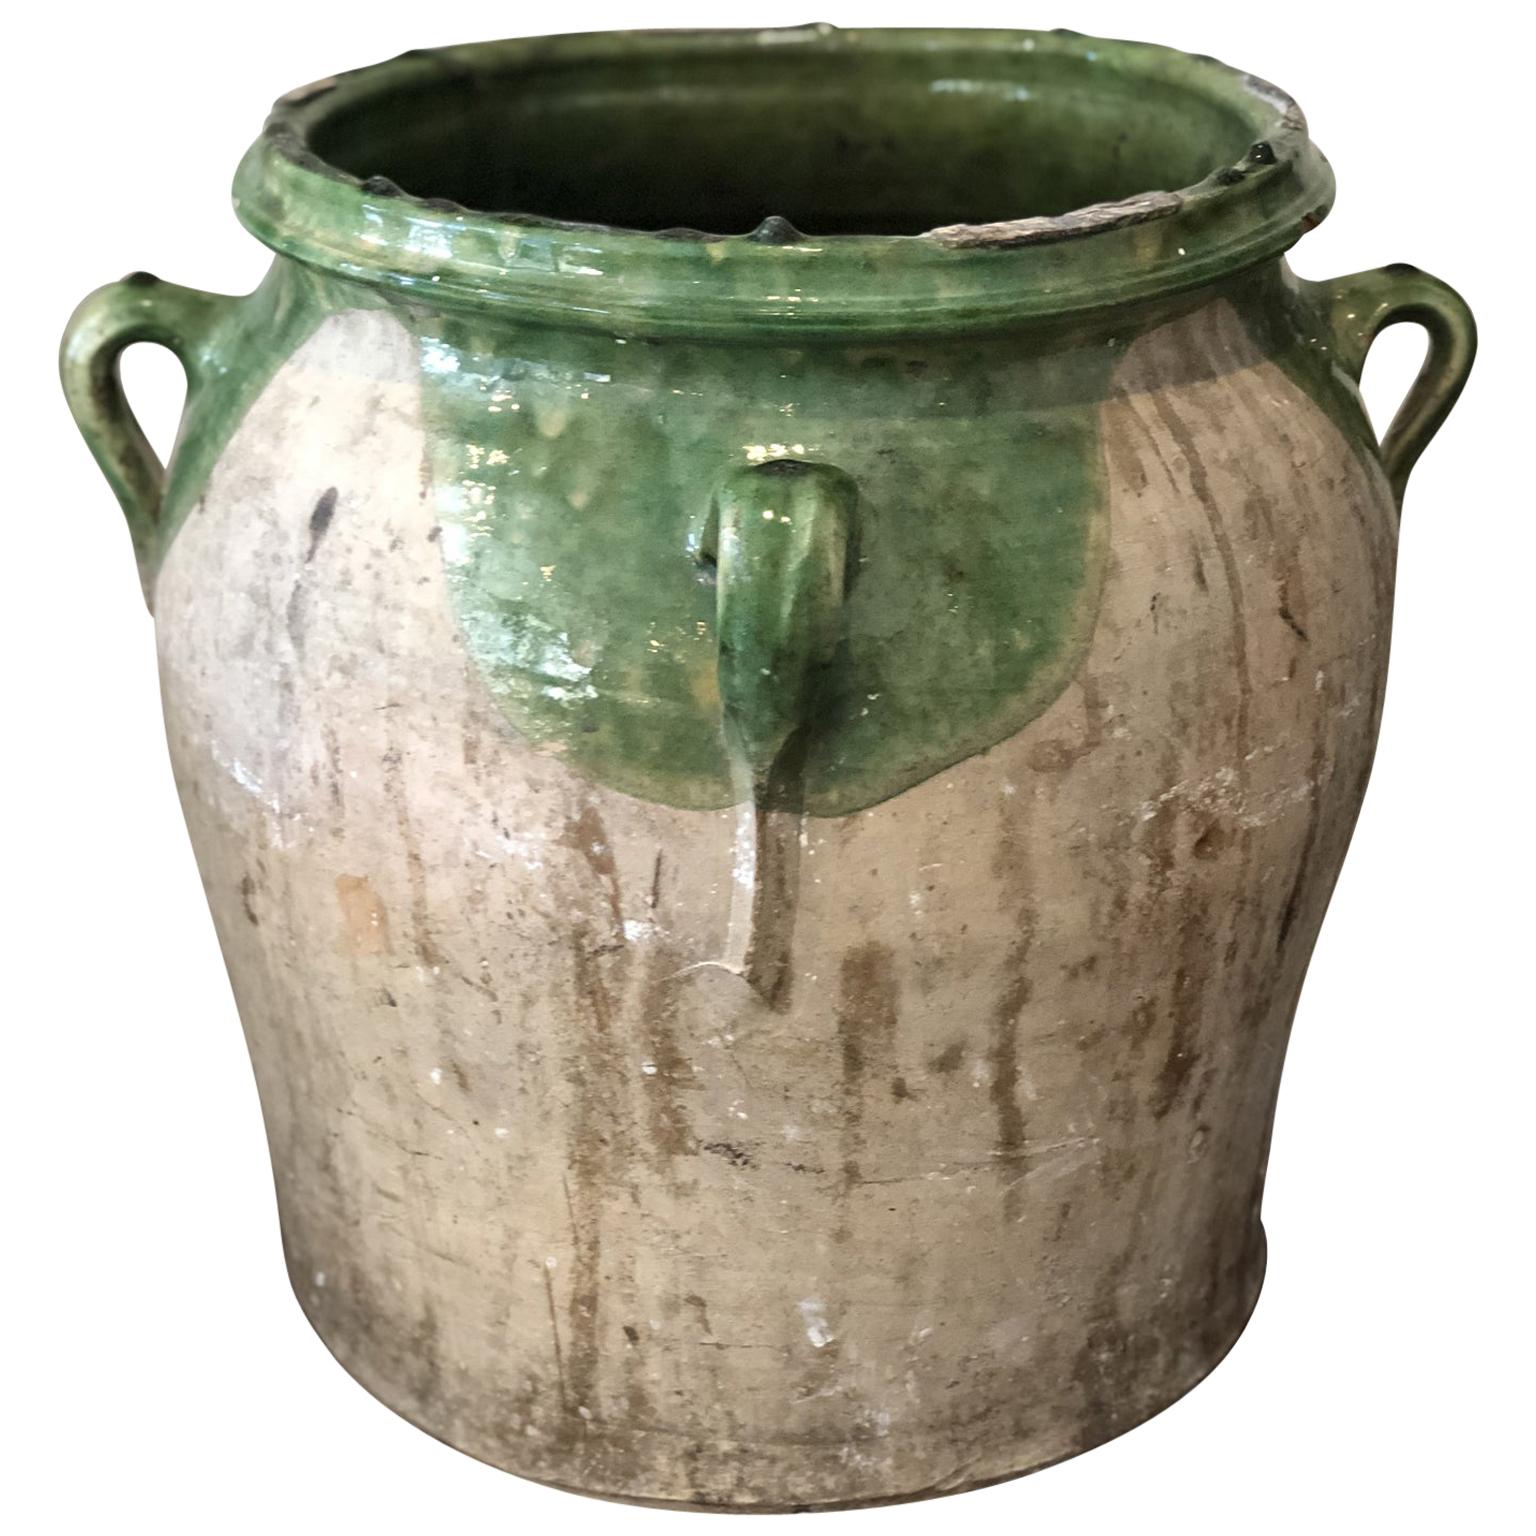 19th Century Large French Glazed White & Green Terracotta Pot/ Urn with Handles